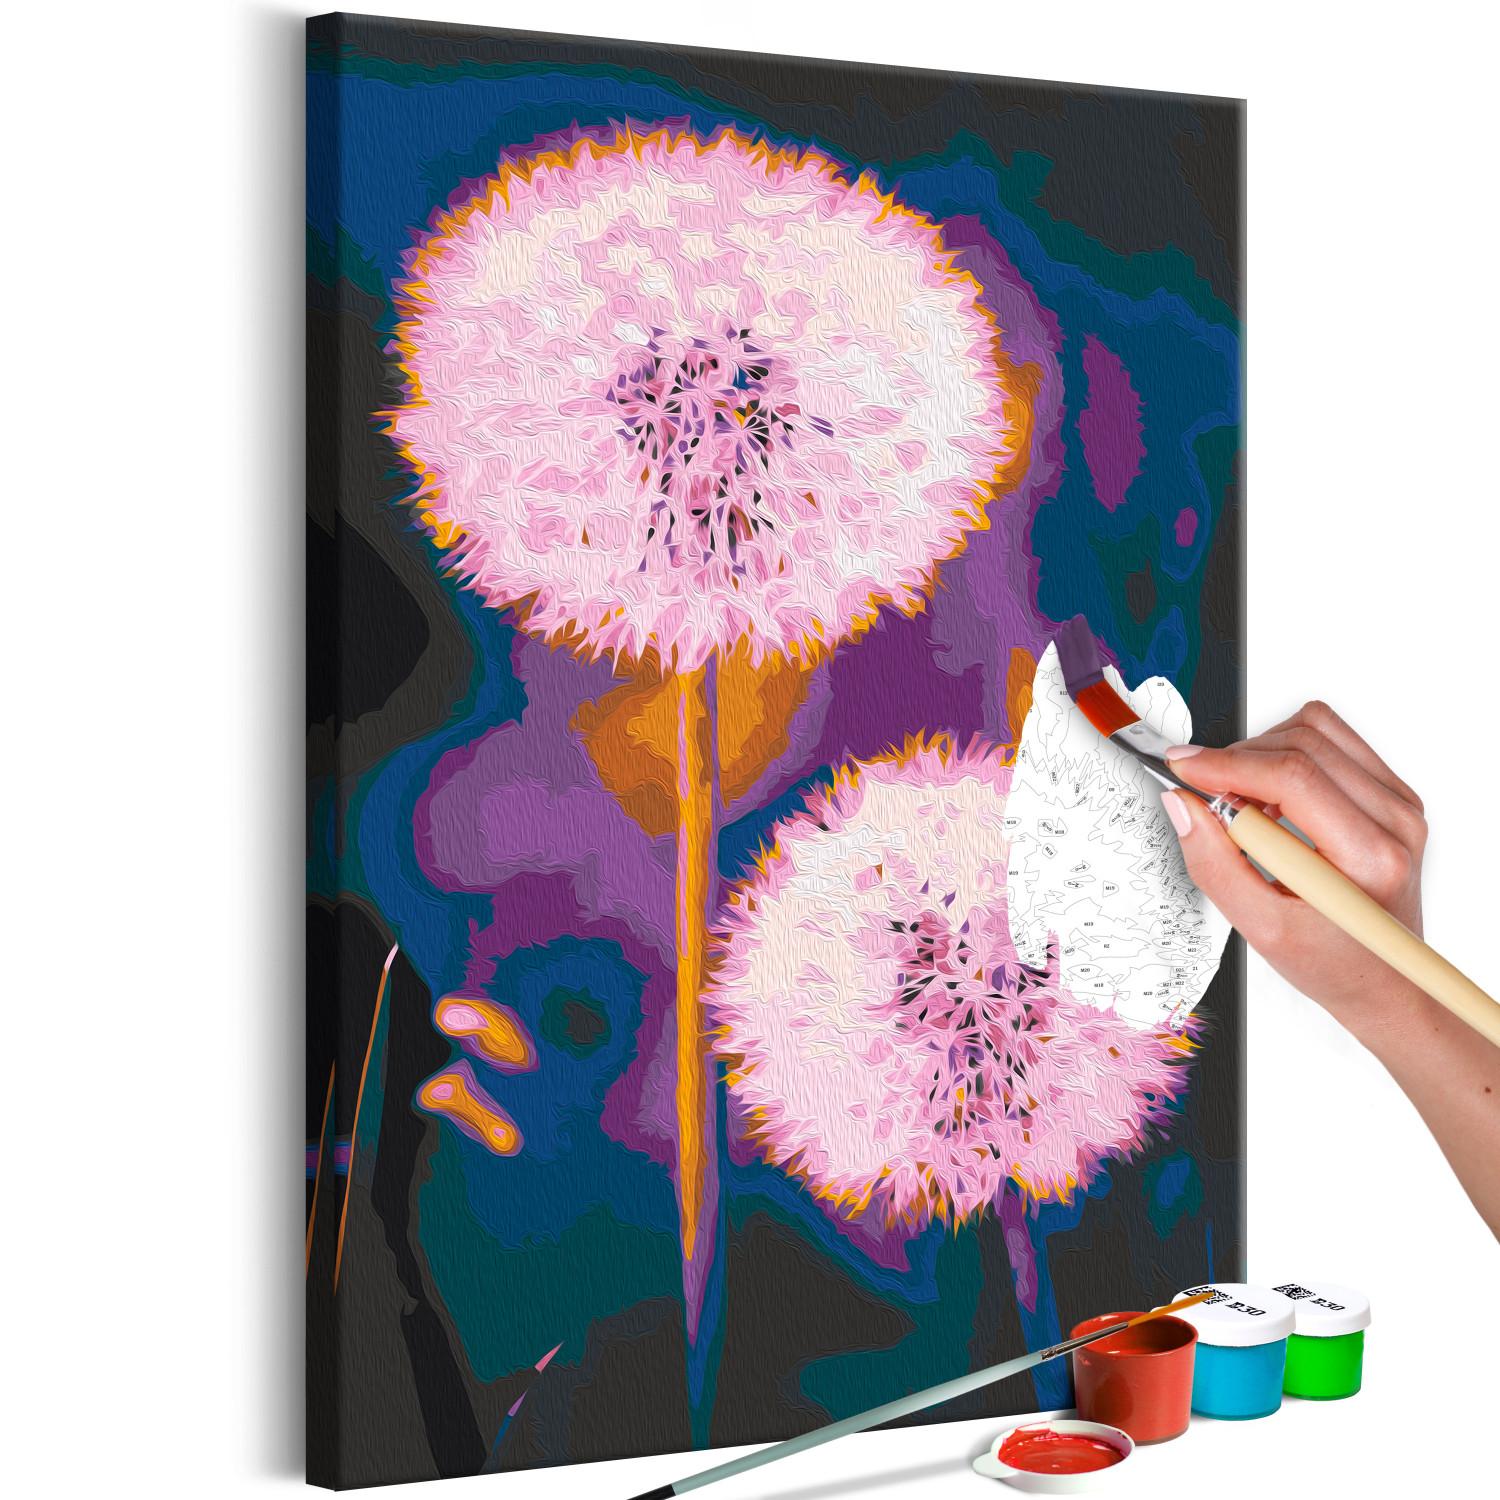  Dibujo para pintar con números Fluffy Balls - Large Pink Dandelions on a Dark Two-Color Background